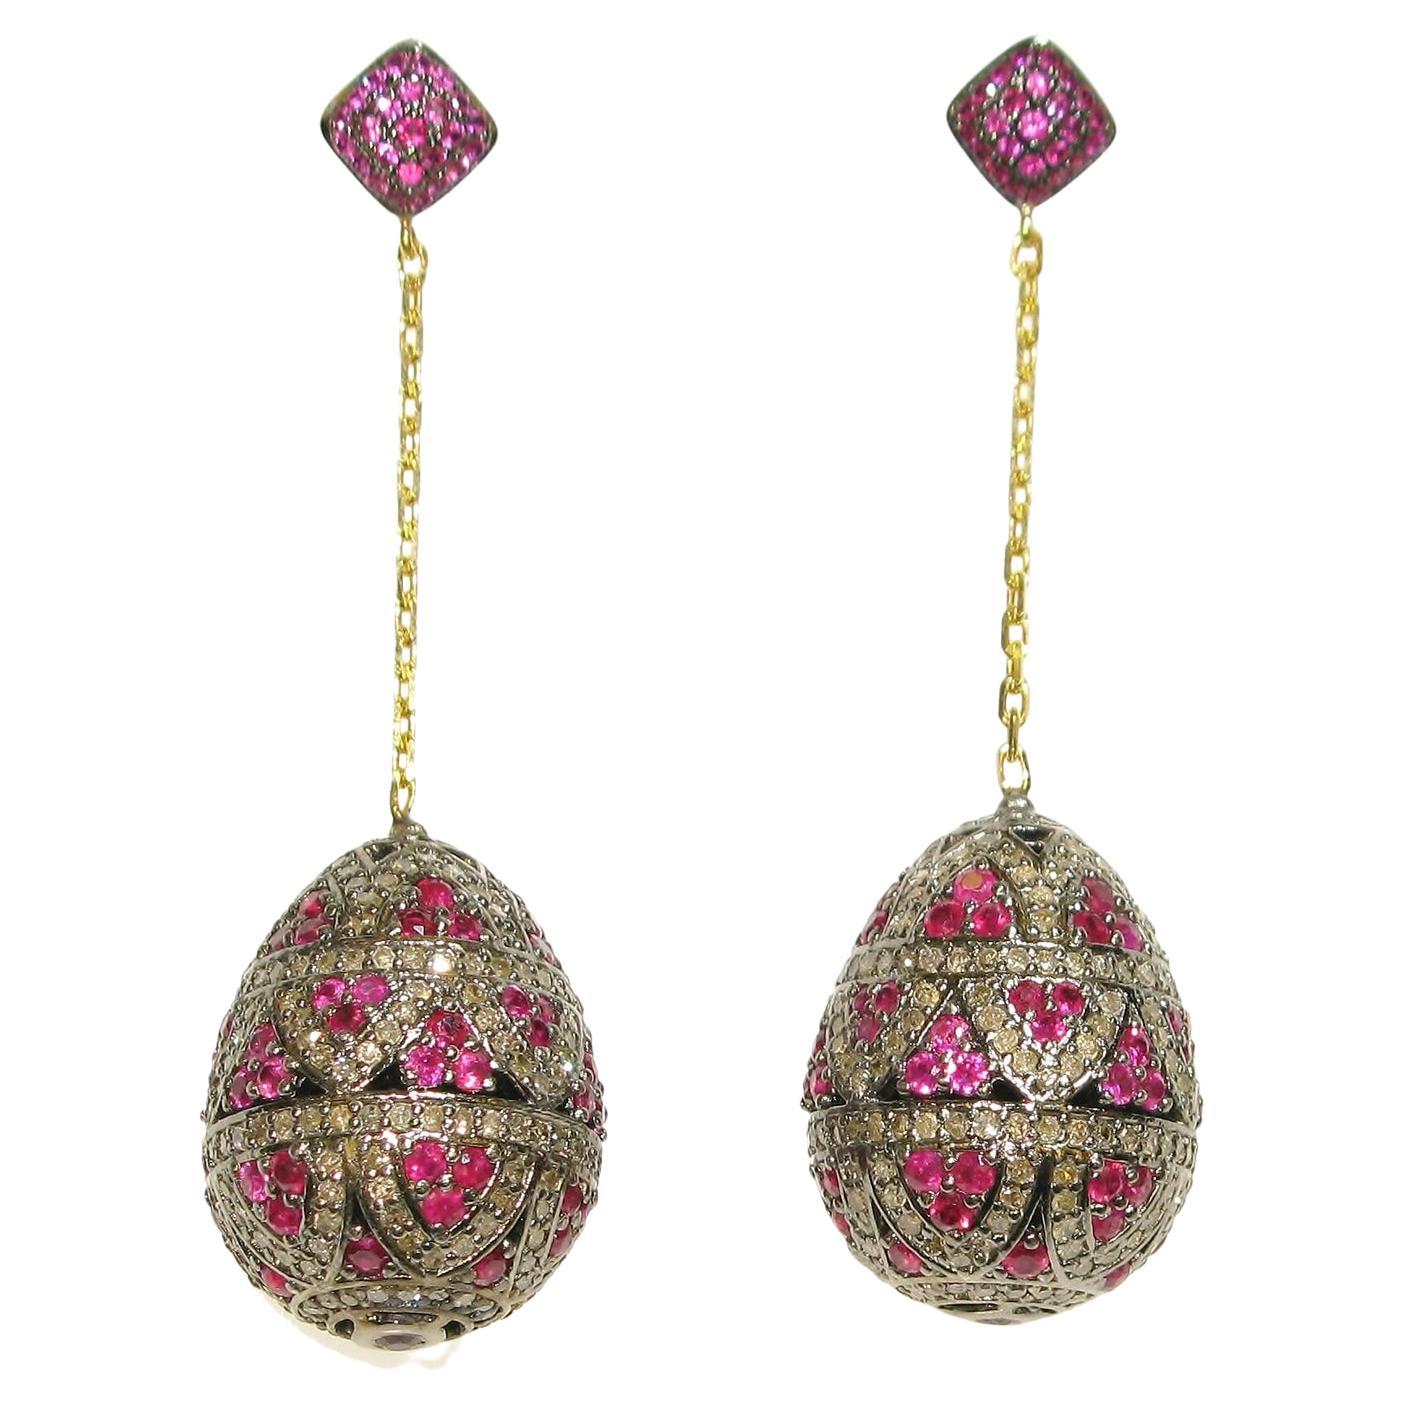 Ruby & Pave Diamond Ball Earrings Made in 18k Gold & Silver